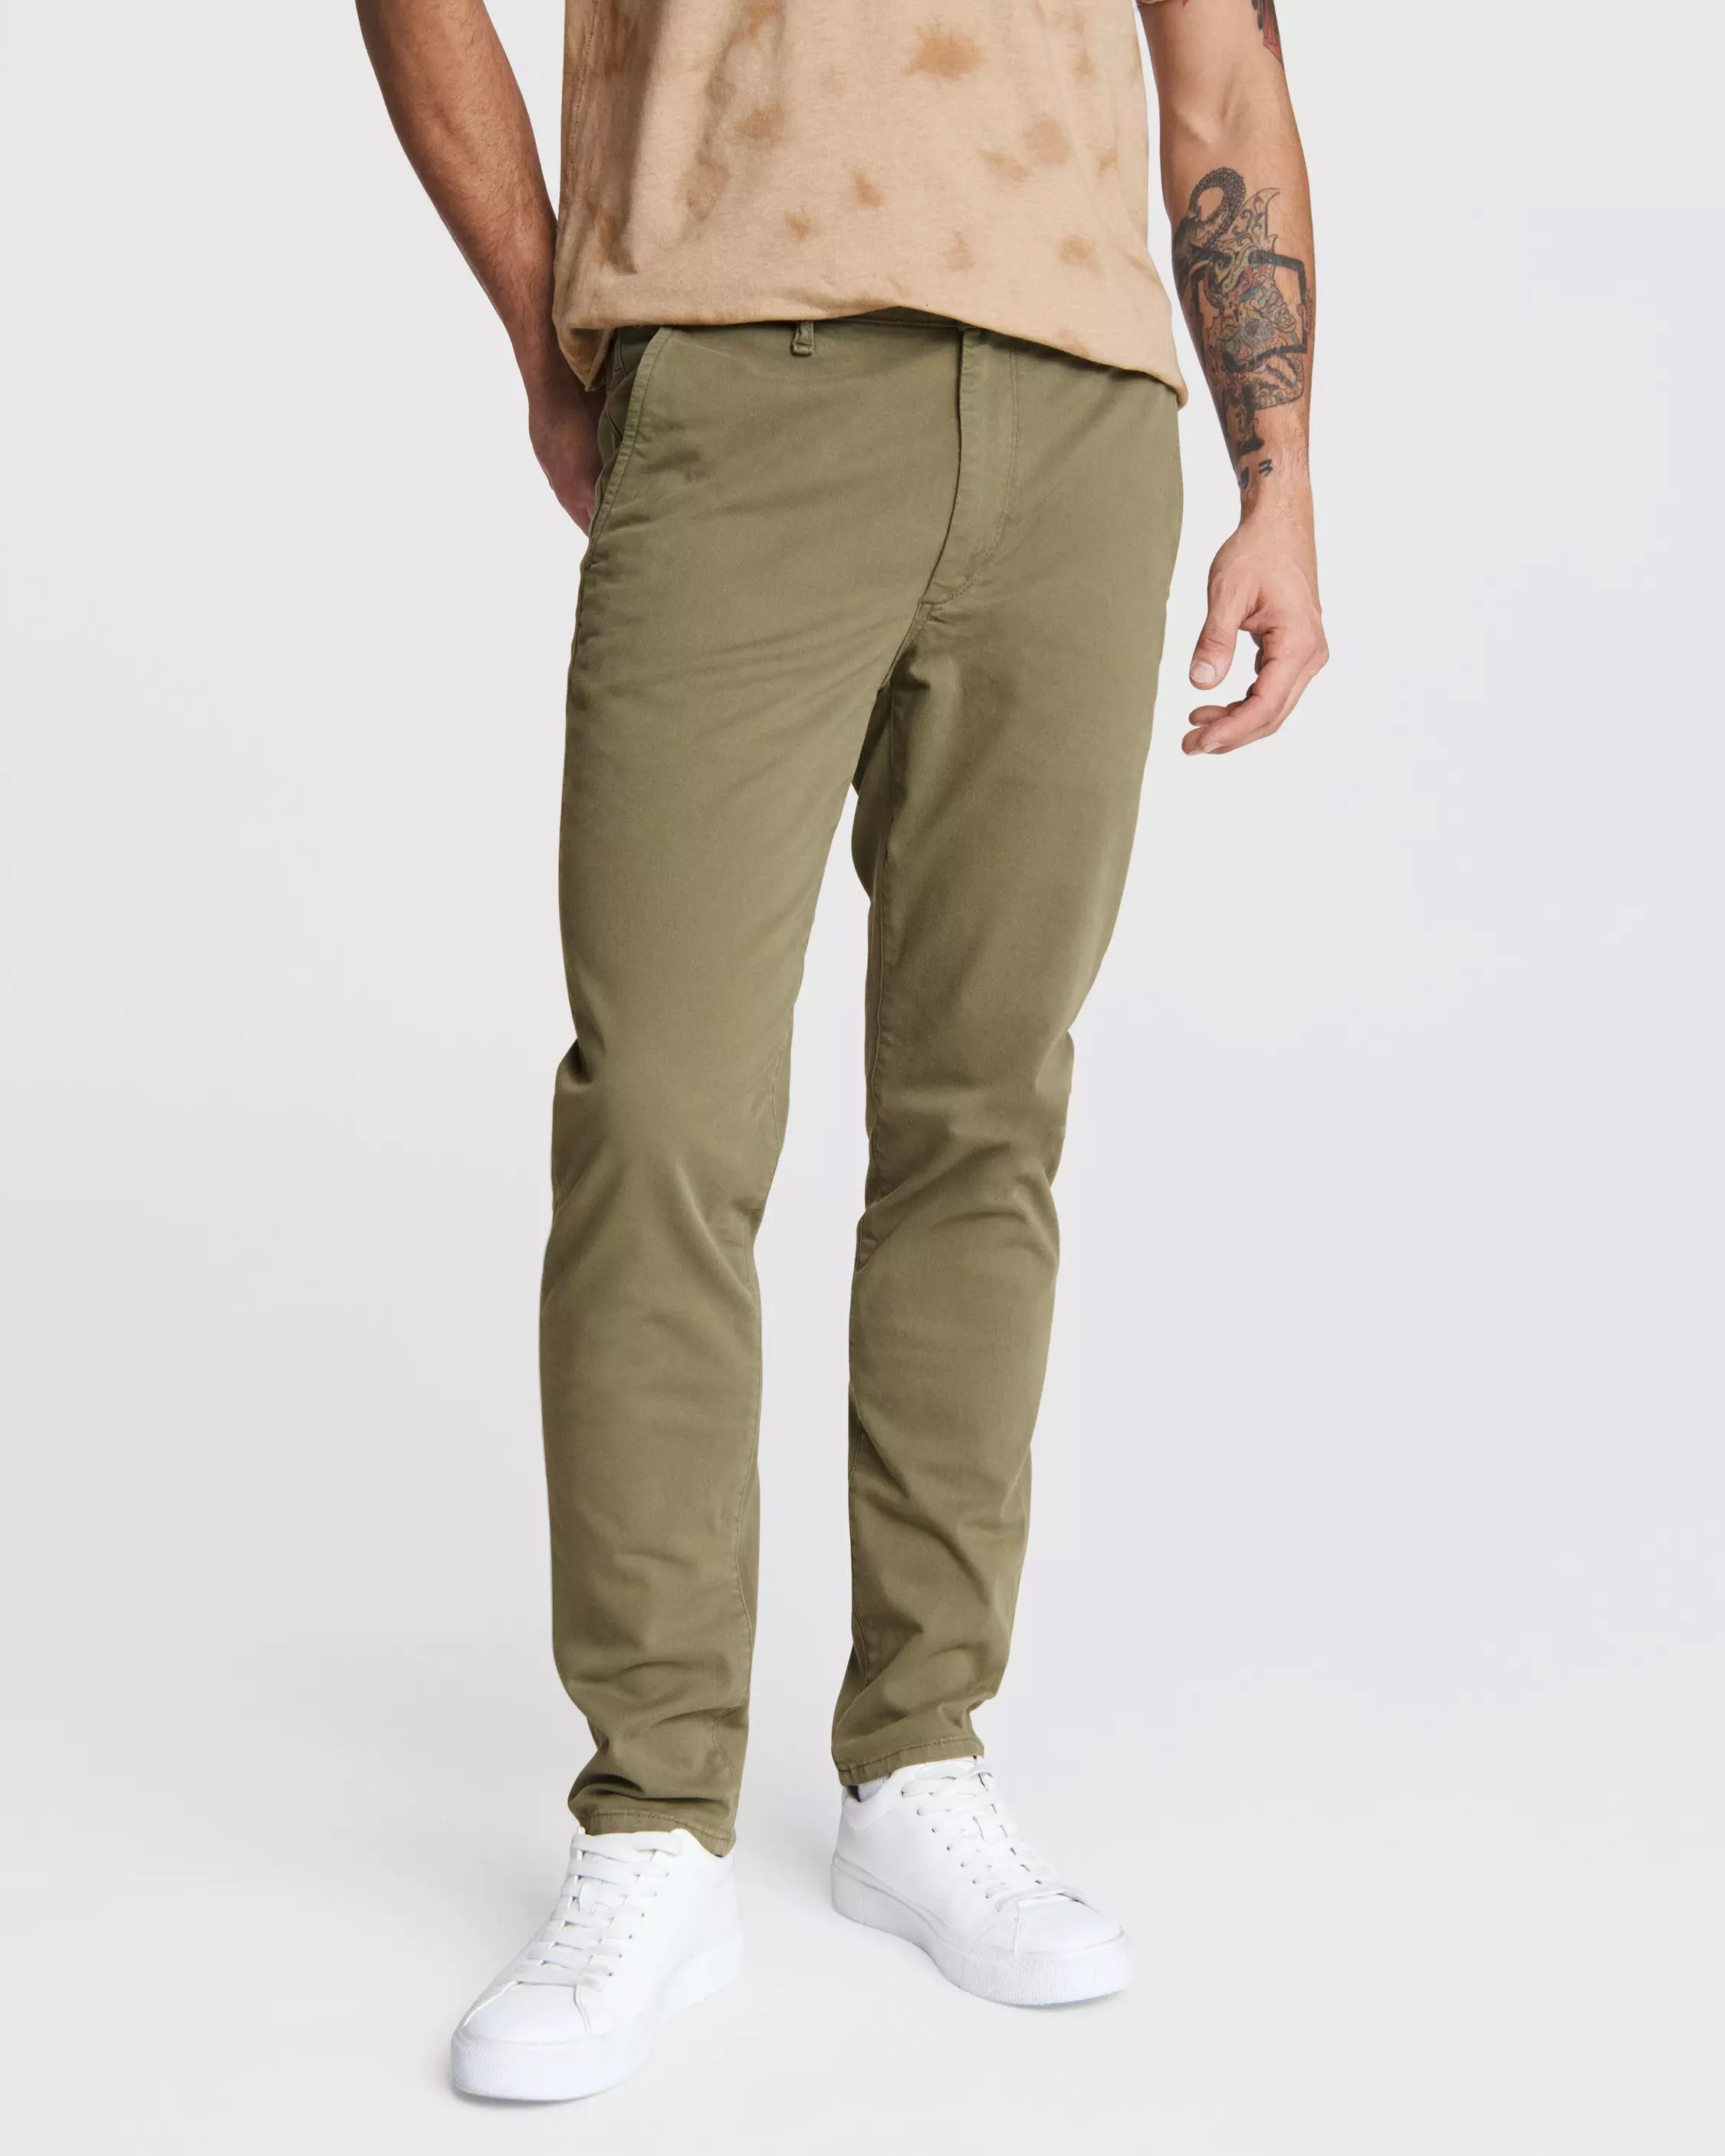 The Best Chinos to Wear When You Get Bored of Blue Jeans | Gear Patrol